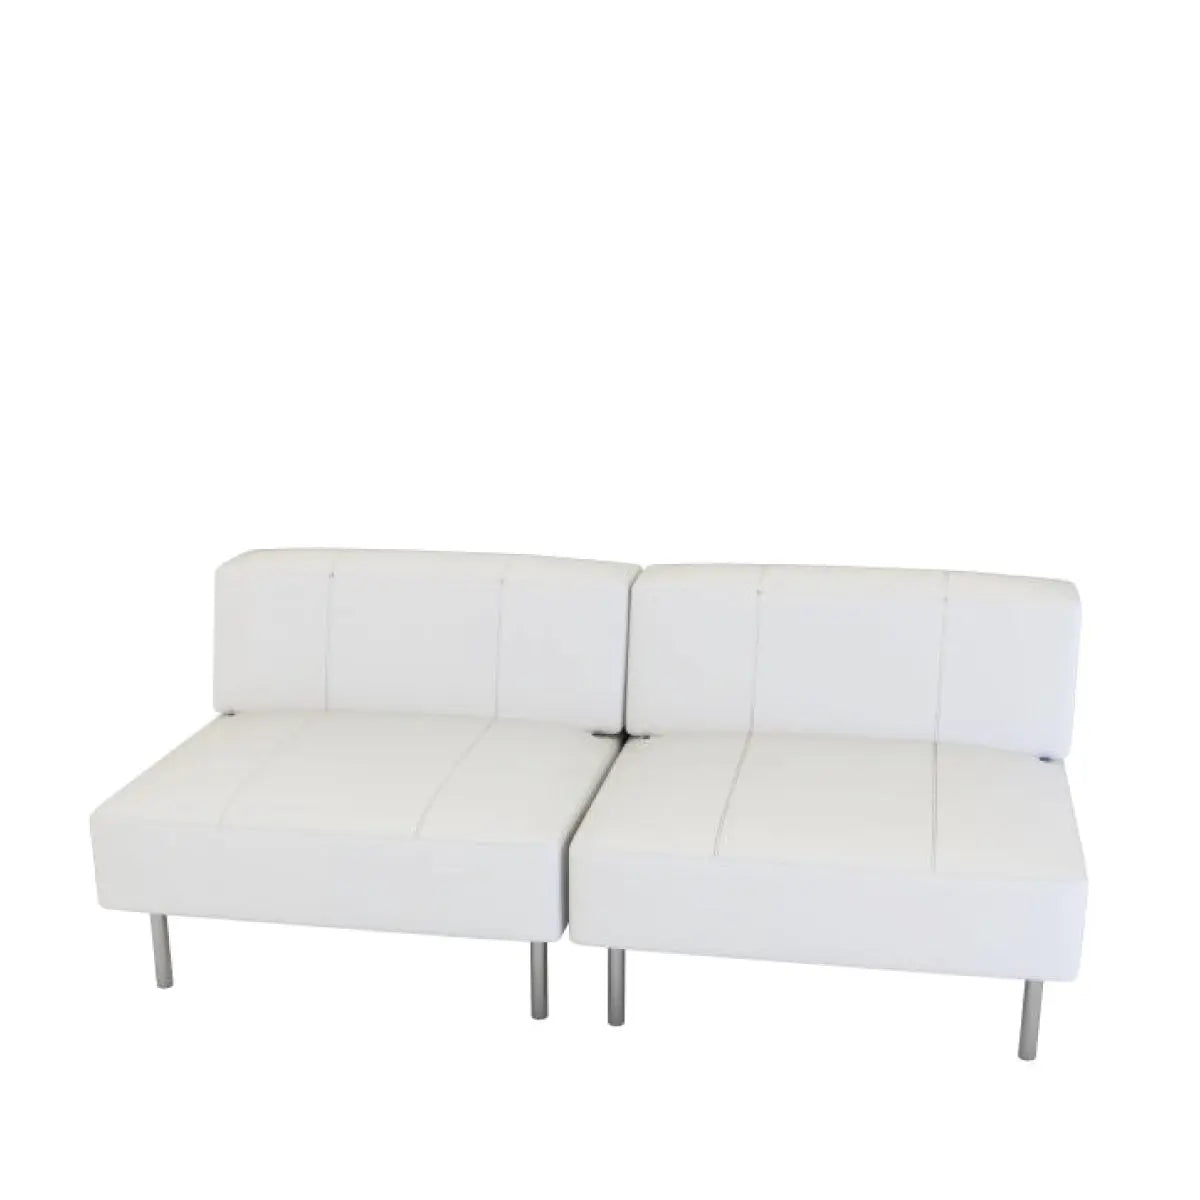 Endless 3 seater square sofa without arms Desert River Rentals